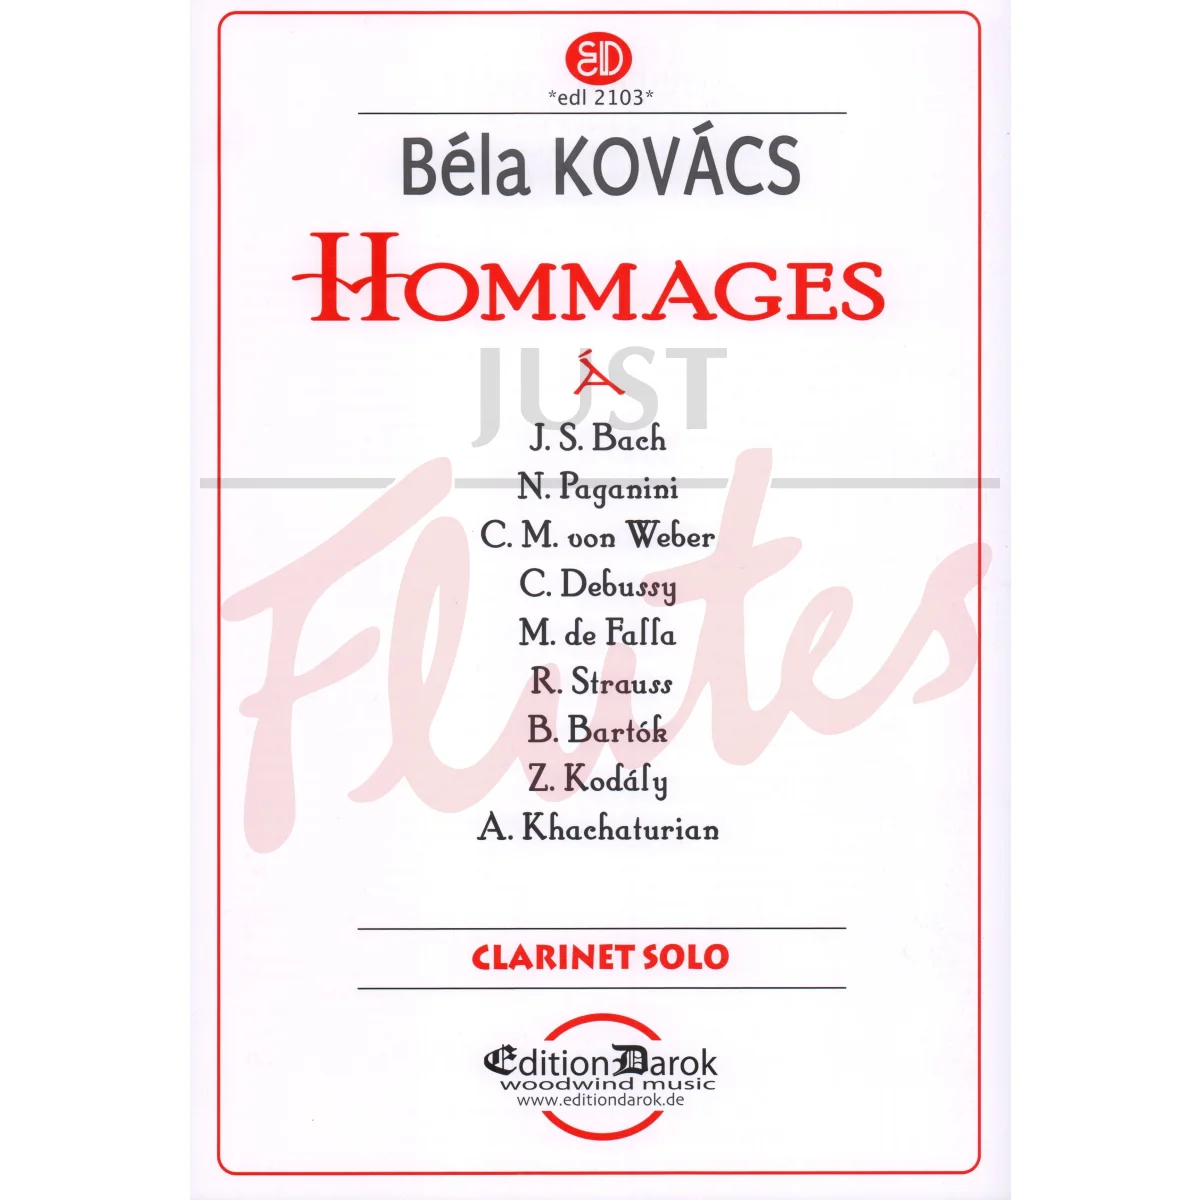 Hommages for Solo Clarinet